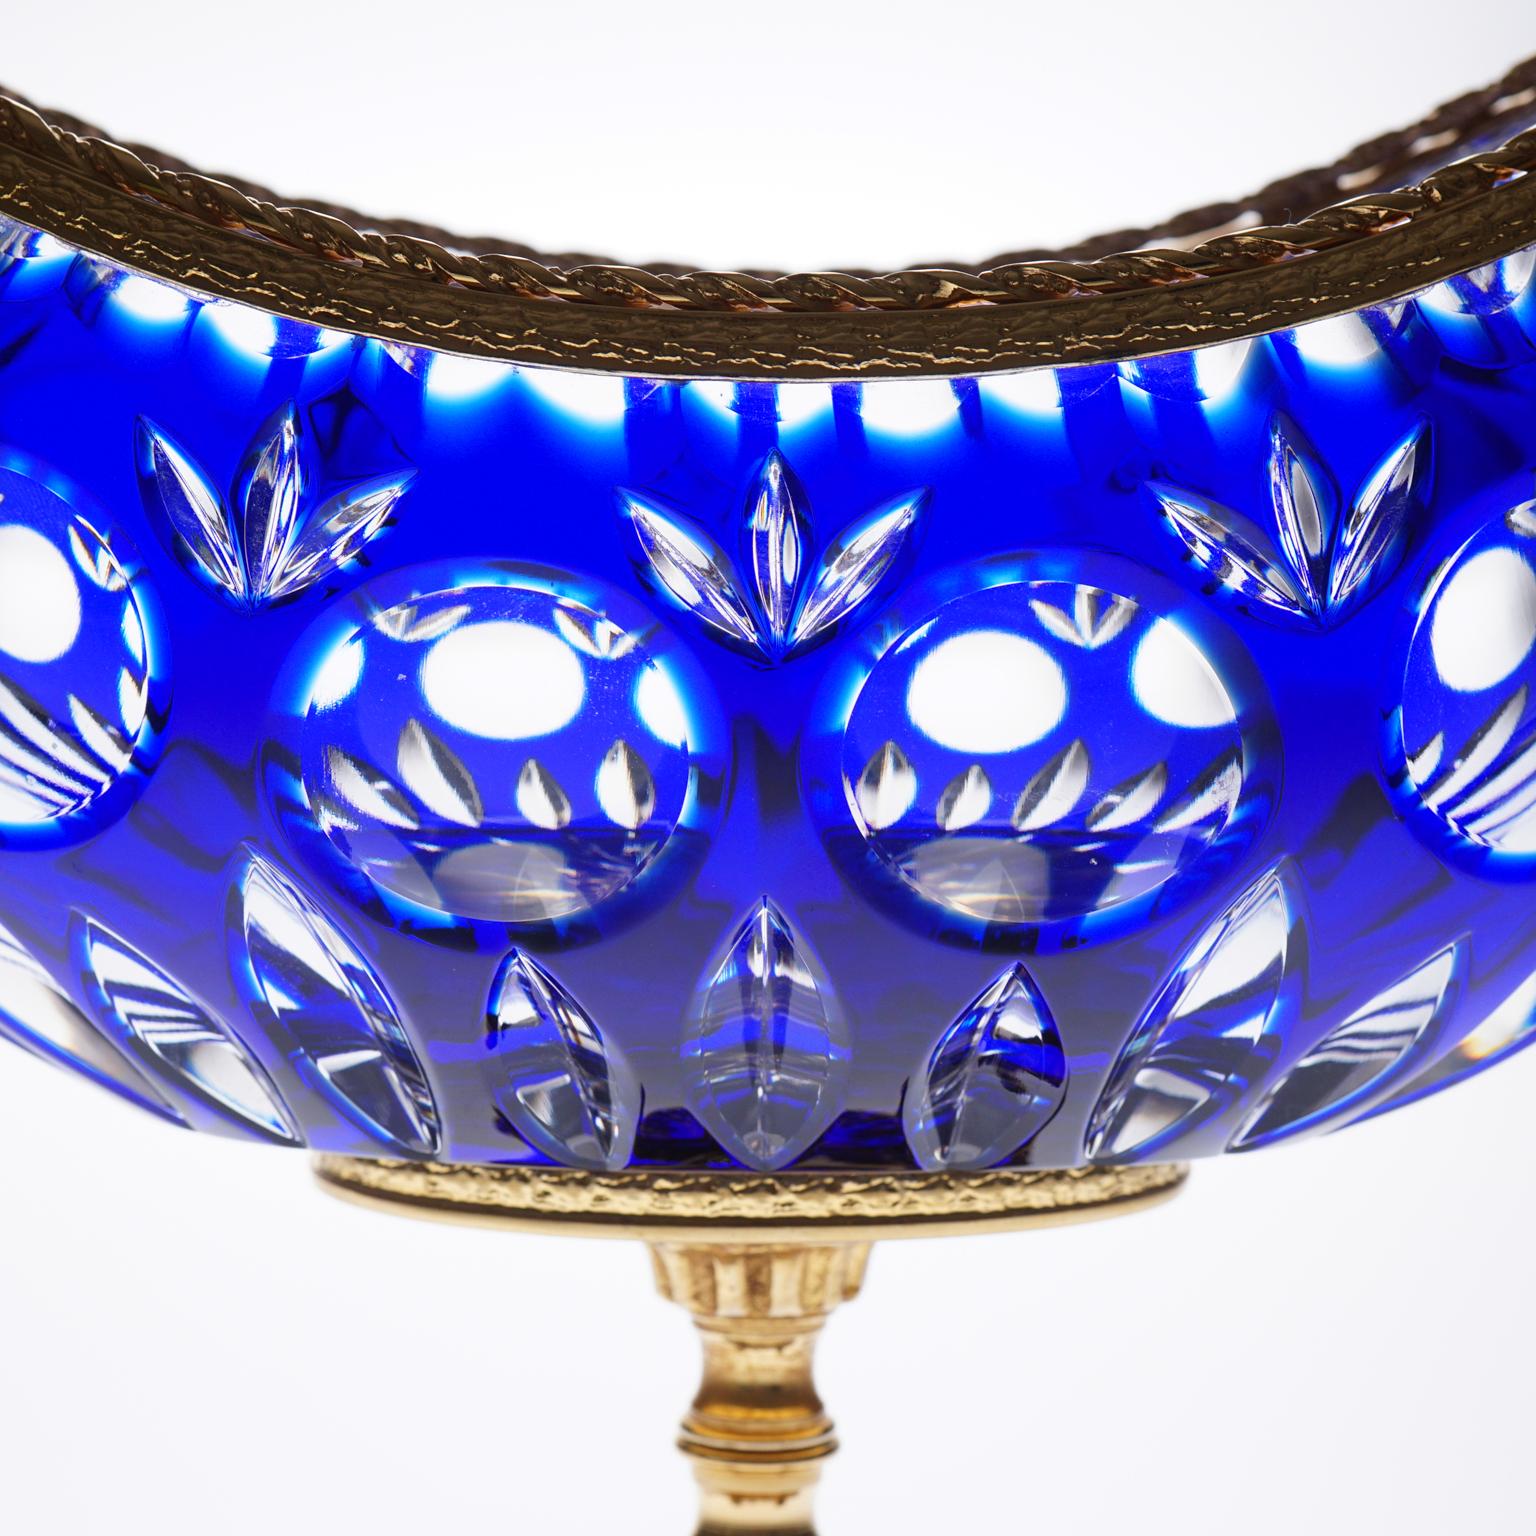 Gorgeous blue crystal and bronze jardinière product by Cristallerie de Montbronn, embellished with 22-carats gold on the top and foot.

This item is perfect for either flowers amateurs or simply people who want to enhance their already tasty